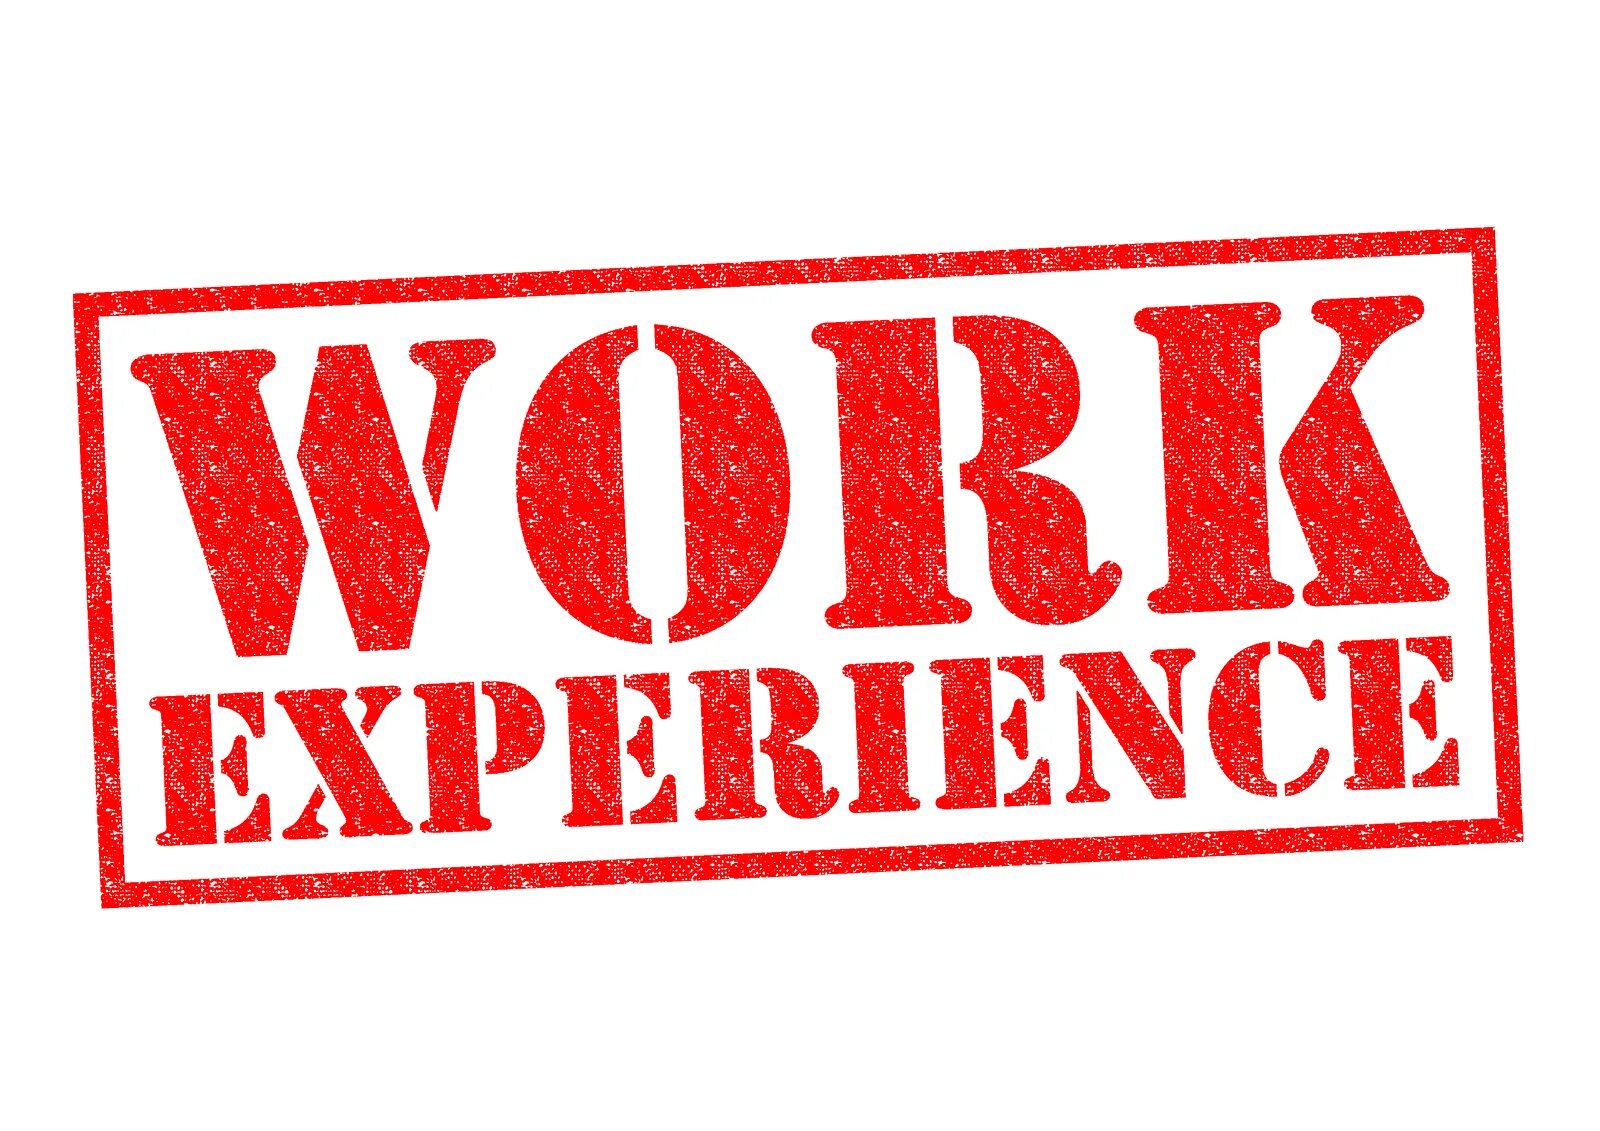 Work experience. Experience текст